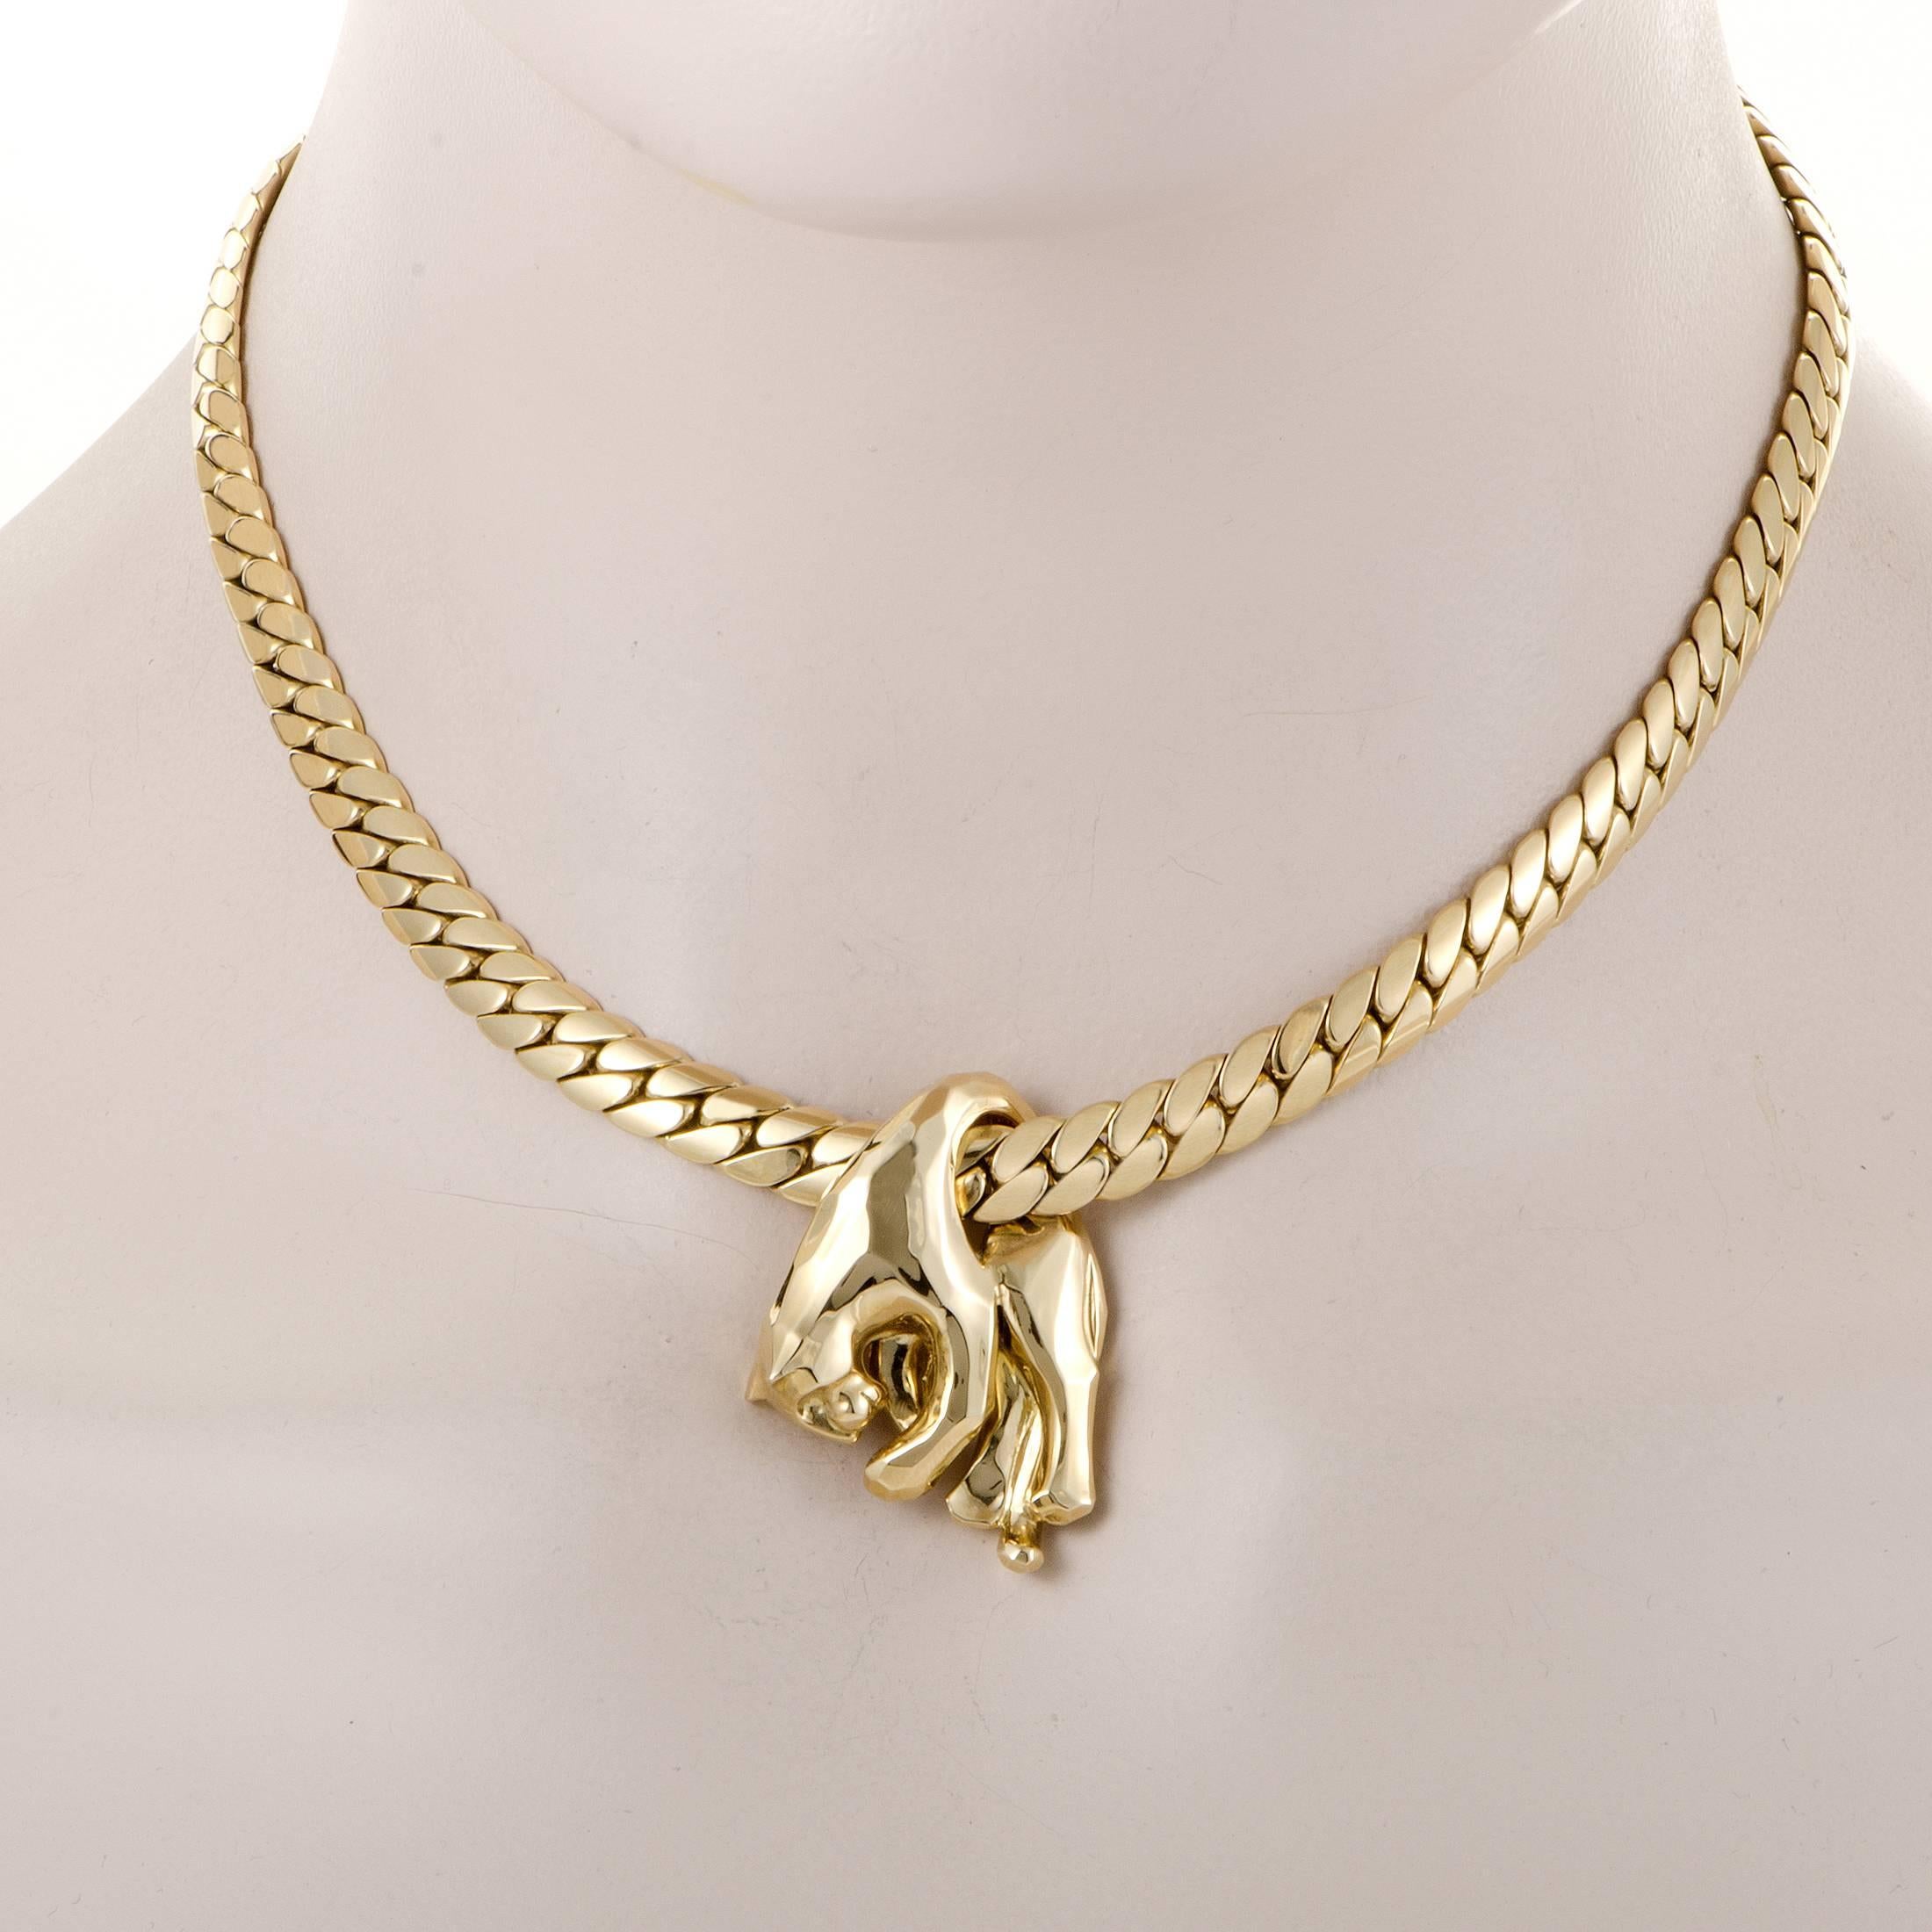 The compelling vintage style and refined taste of this very rare 18K yellow gold necklace from Cartier produce an aura of classic luxury while the intriguing pendant boasts the brand's iconic shape of a panther in a slightly offbeat interpretation.